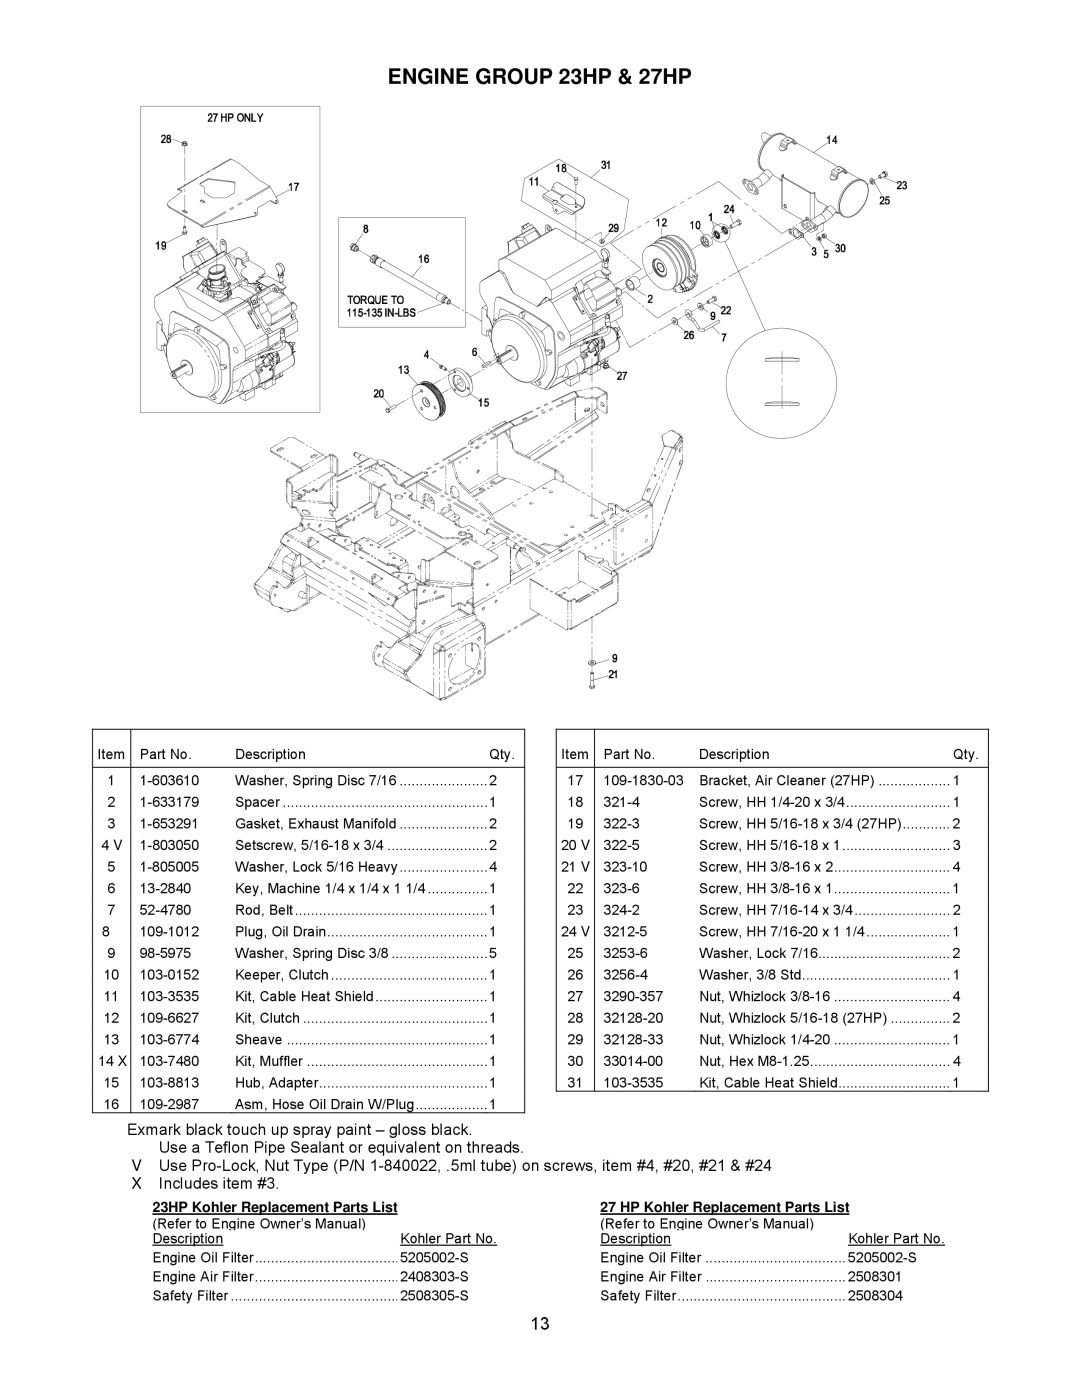 Exmark Air-Cooled manual Engine Group 23HP & 27HP, HP Kohler Replacement Parts List 